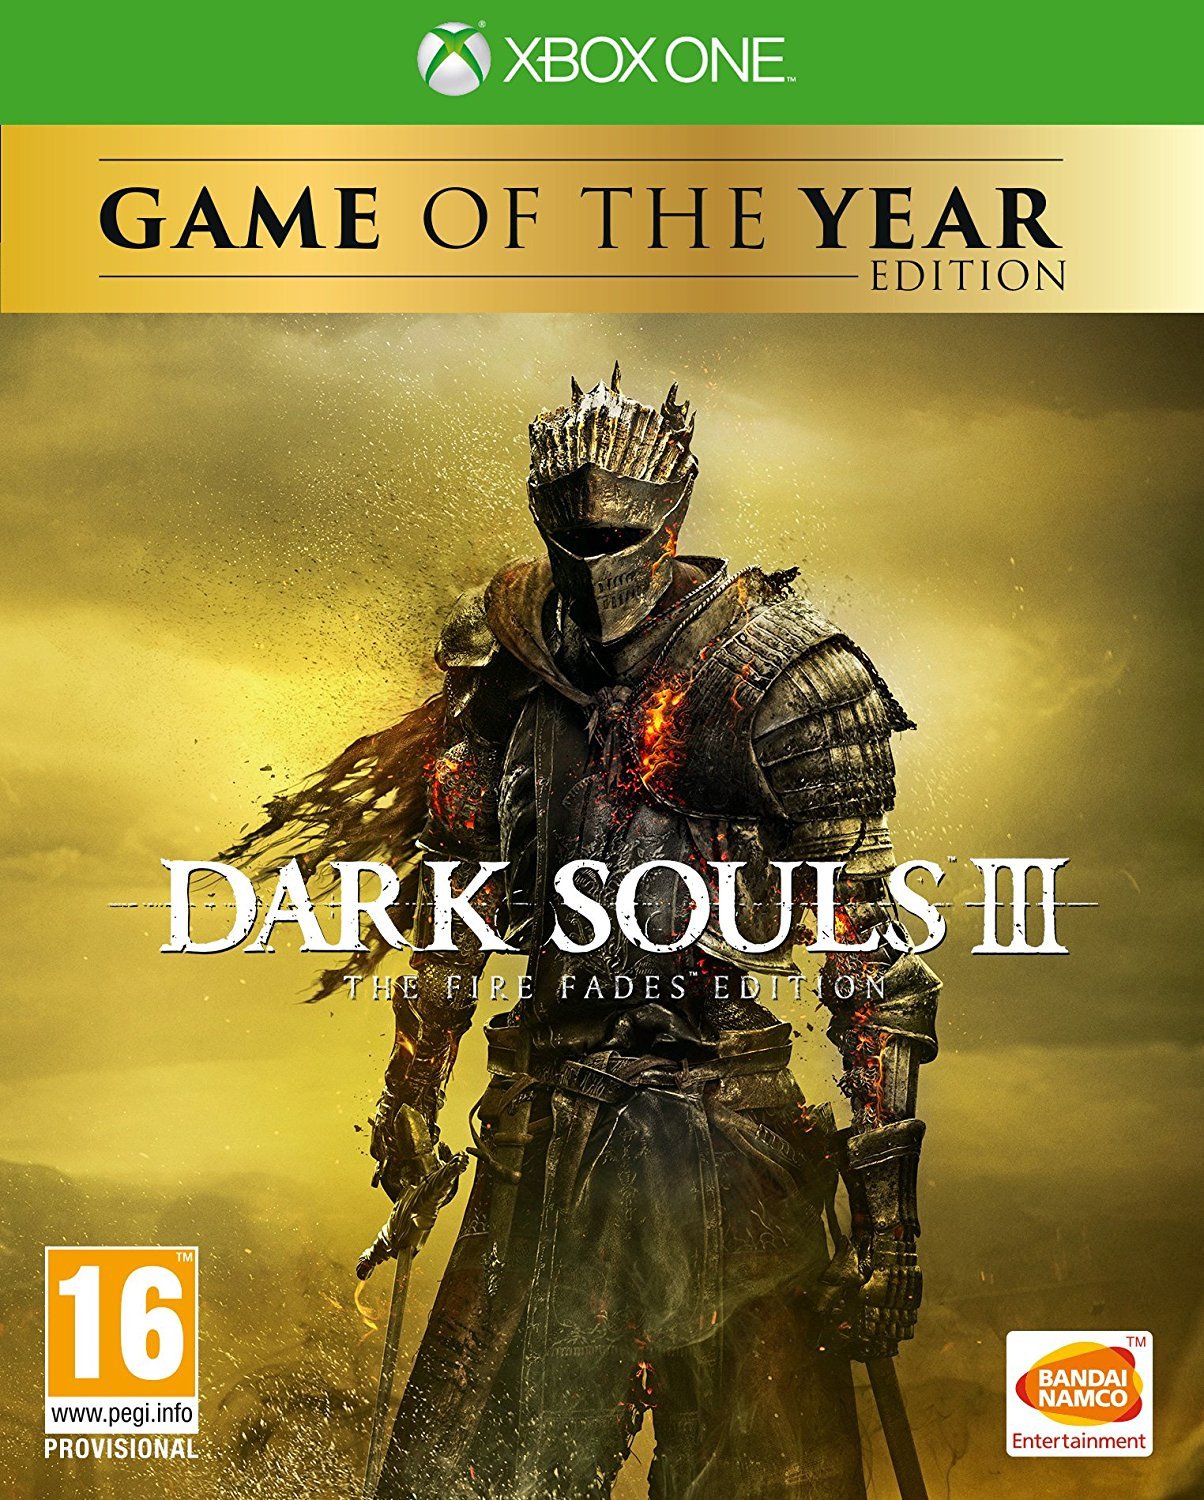 Dark Souls 3 The Fire Fades (Xbox One) - Offer Games